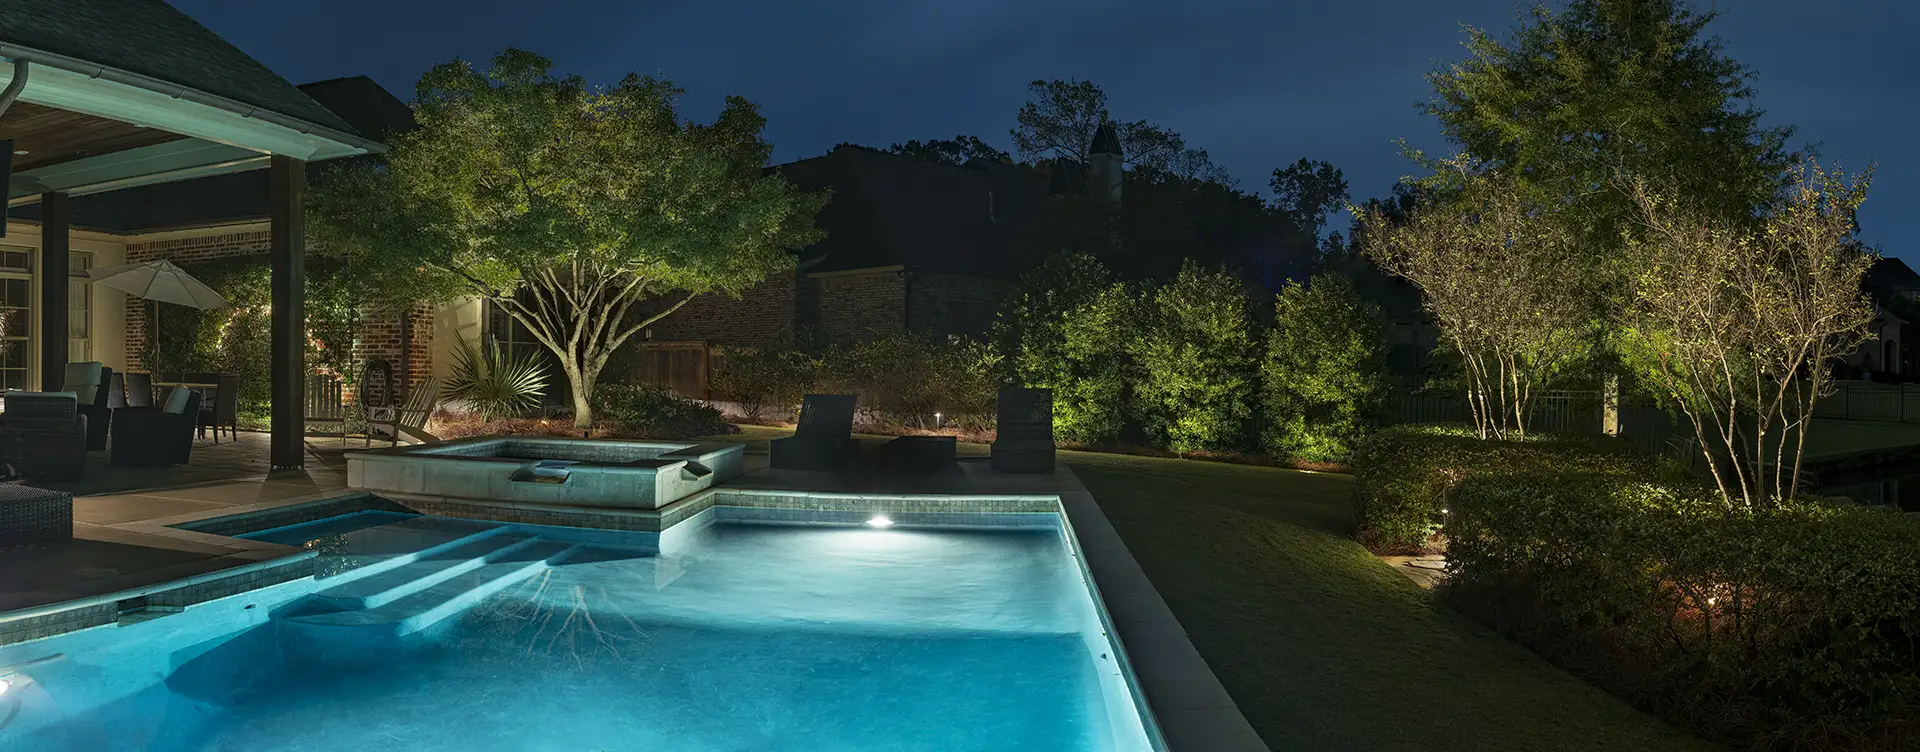 Myrtle Ave image 1 pool seating area Lighthouse Outdoor Lighting and Audio Birmingham AL